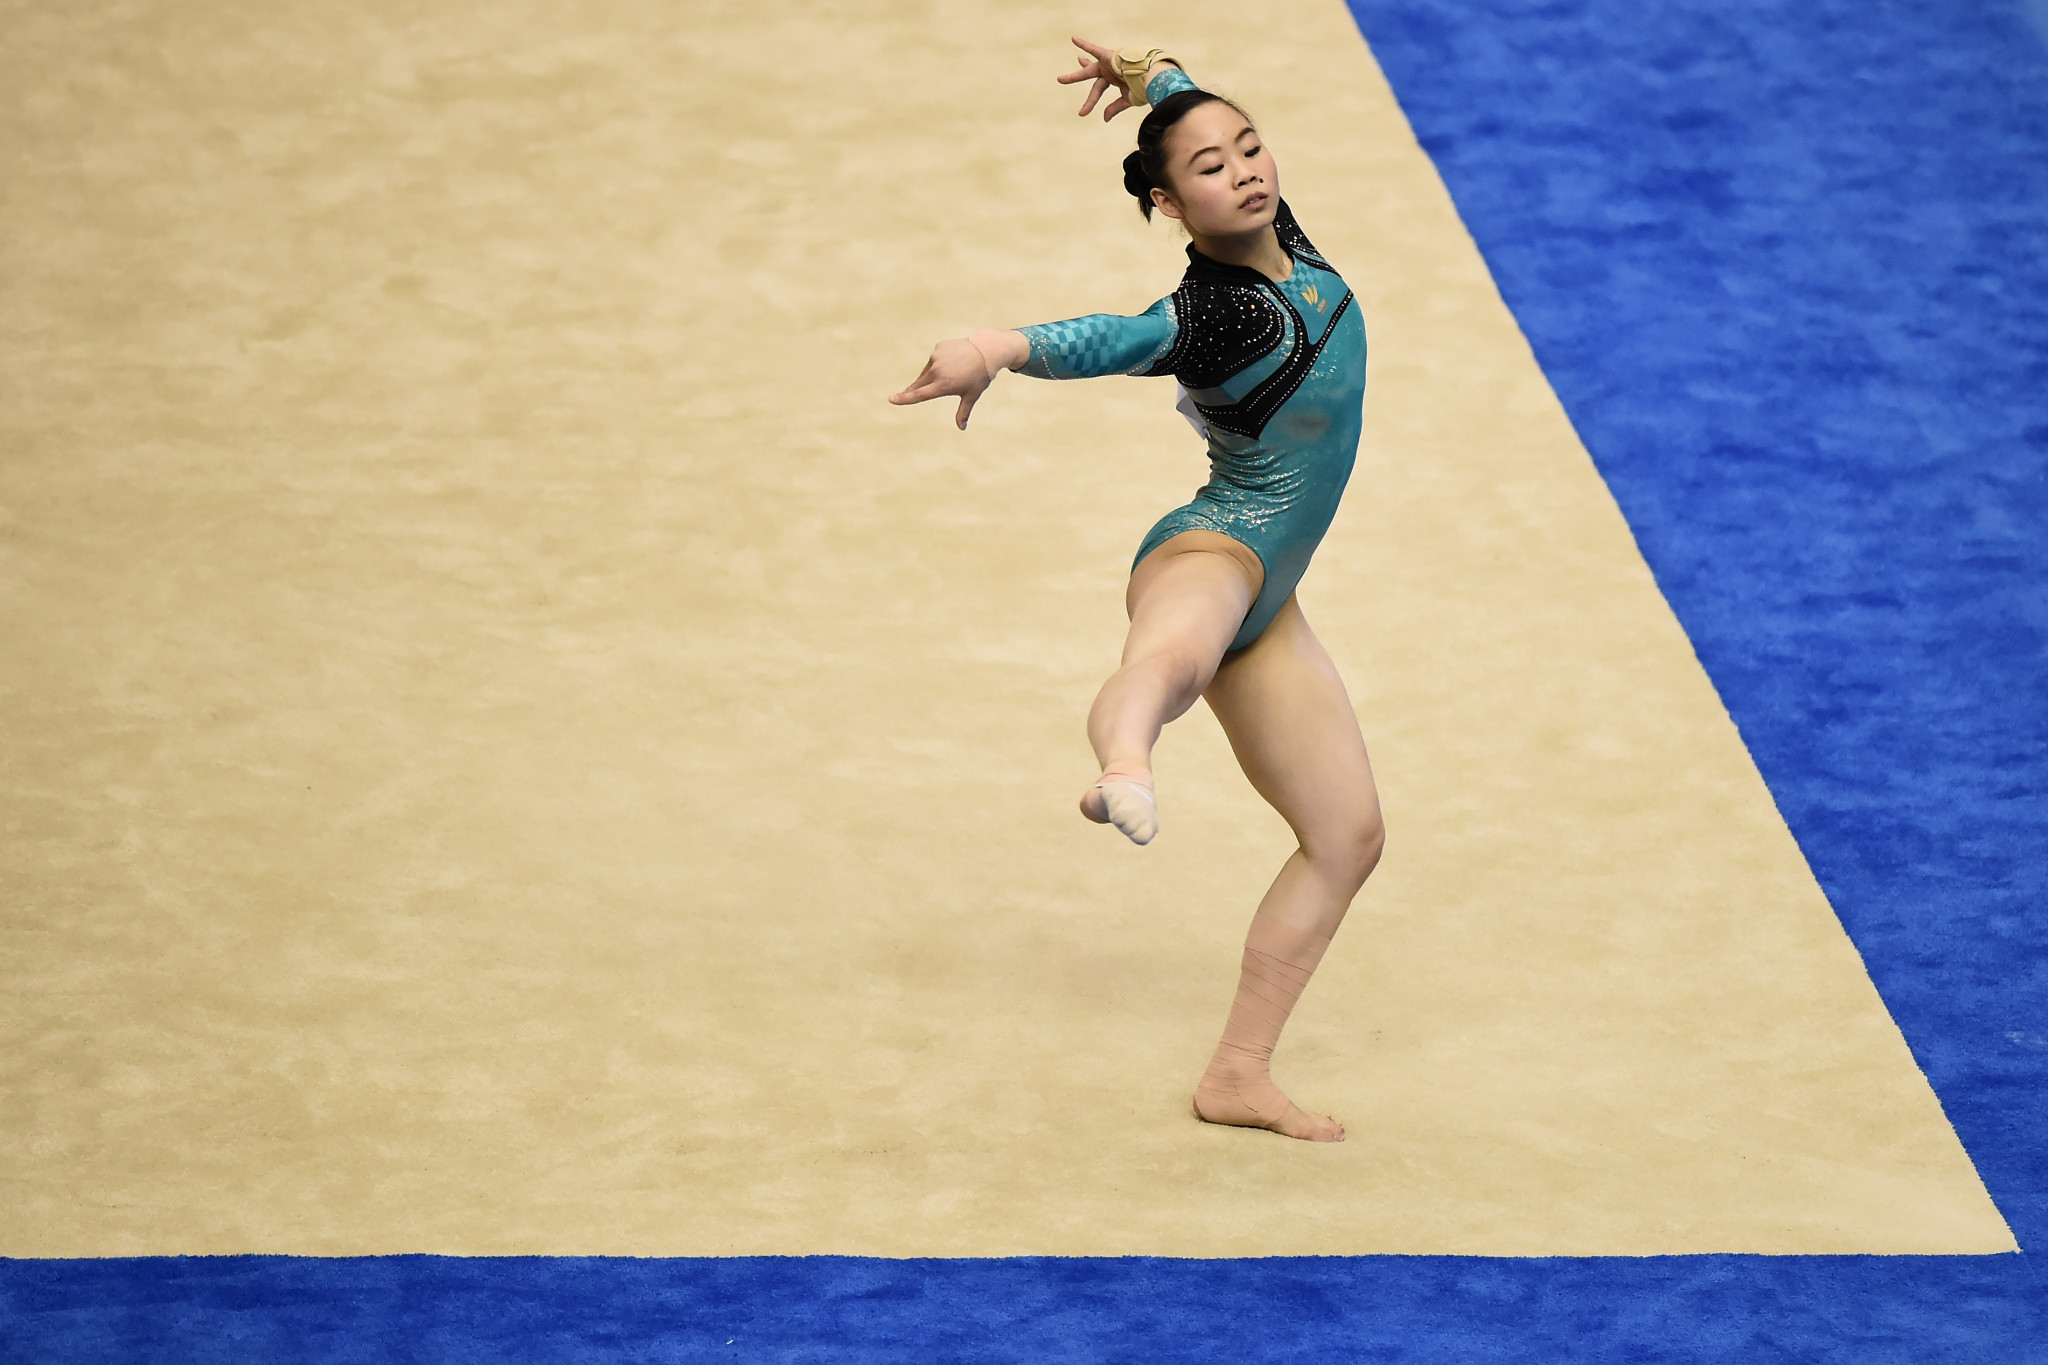 The Japanese gymnast competed at the 2016 Rio Olympics but may not attend the gymnastics World Championships in Doha without her coach ©Getty Images